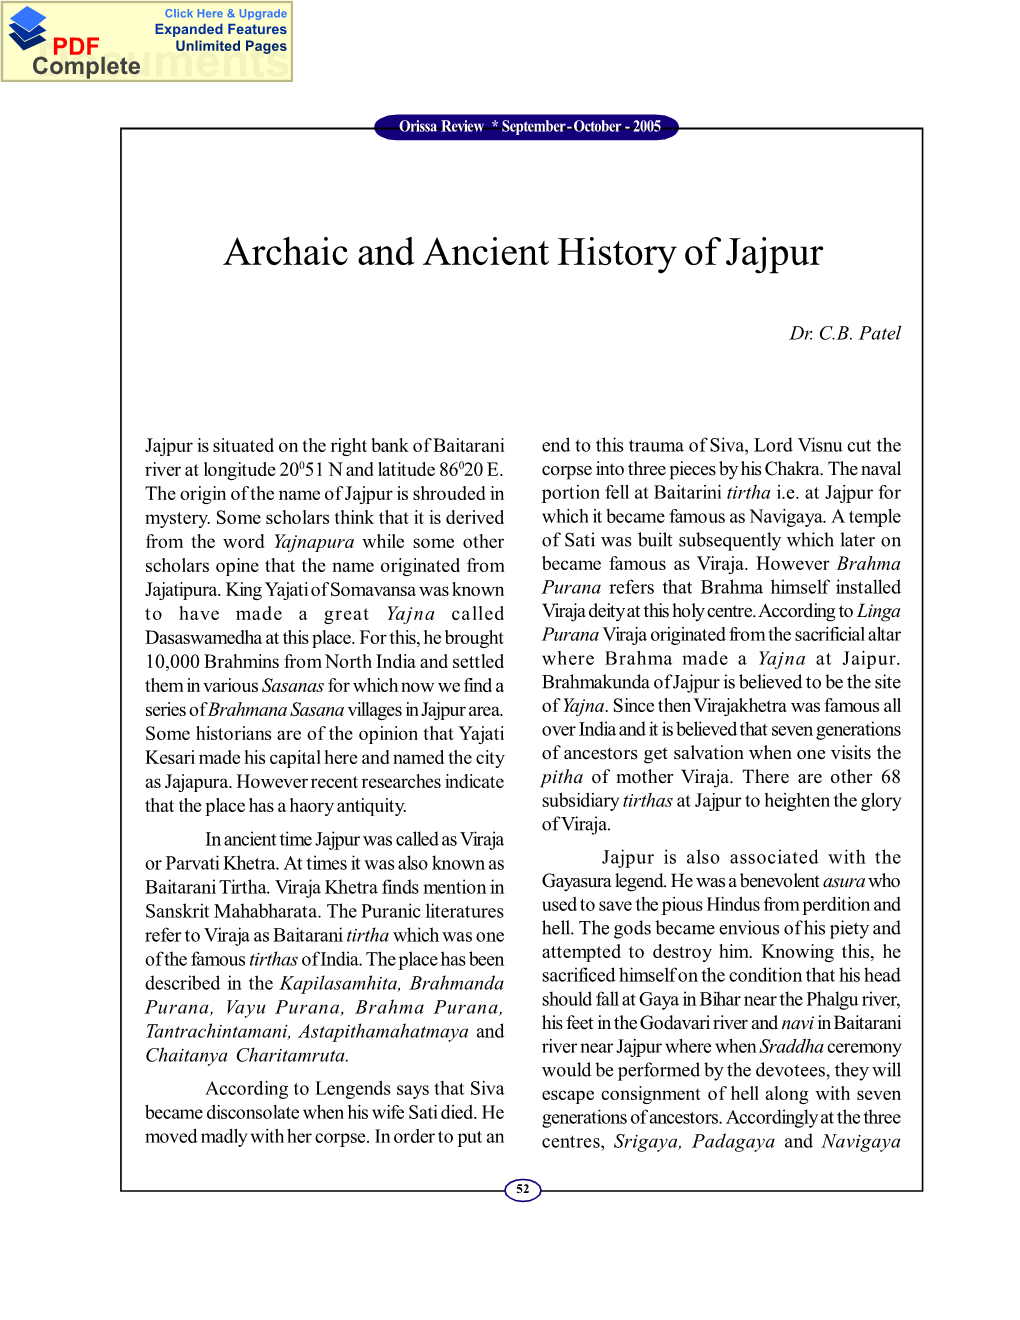 Archaic and Ancient History of Jaipur